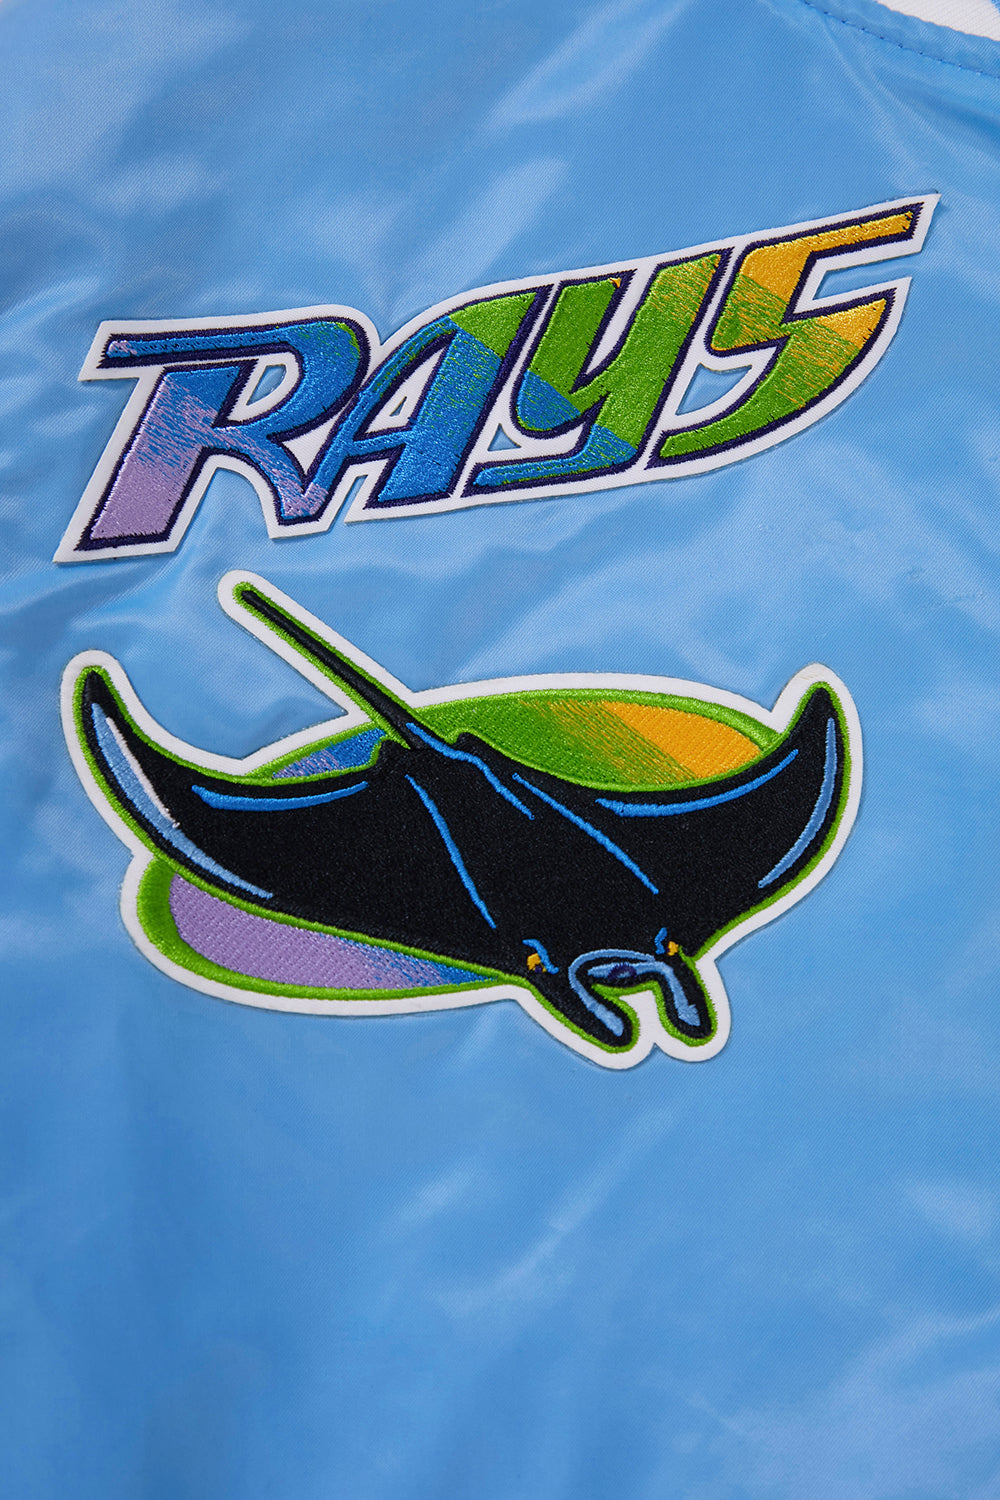 Tampa Bay Devil Rays Pro Standard Cooperstown Collection Retro Shirt